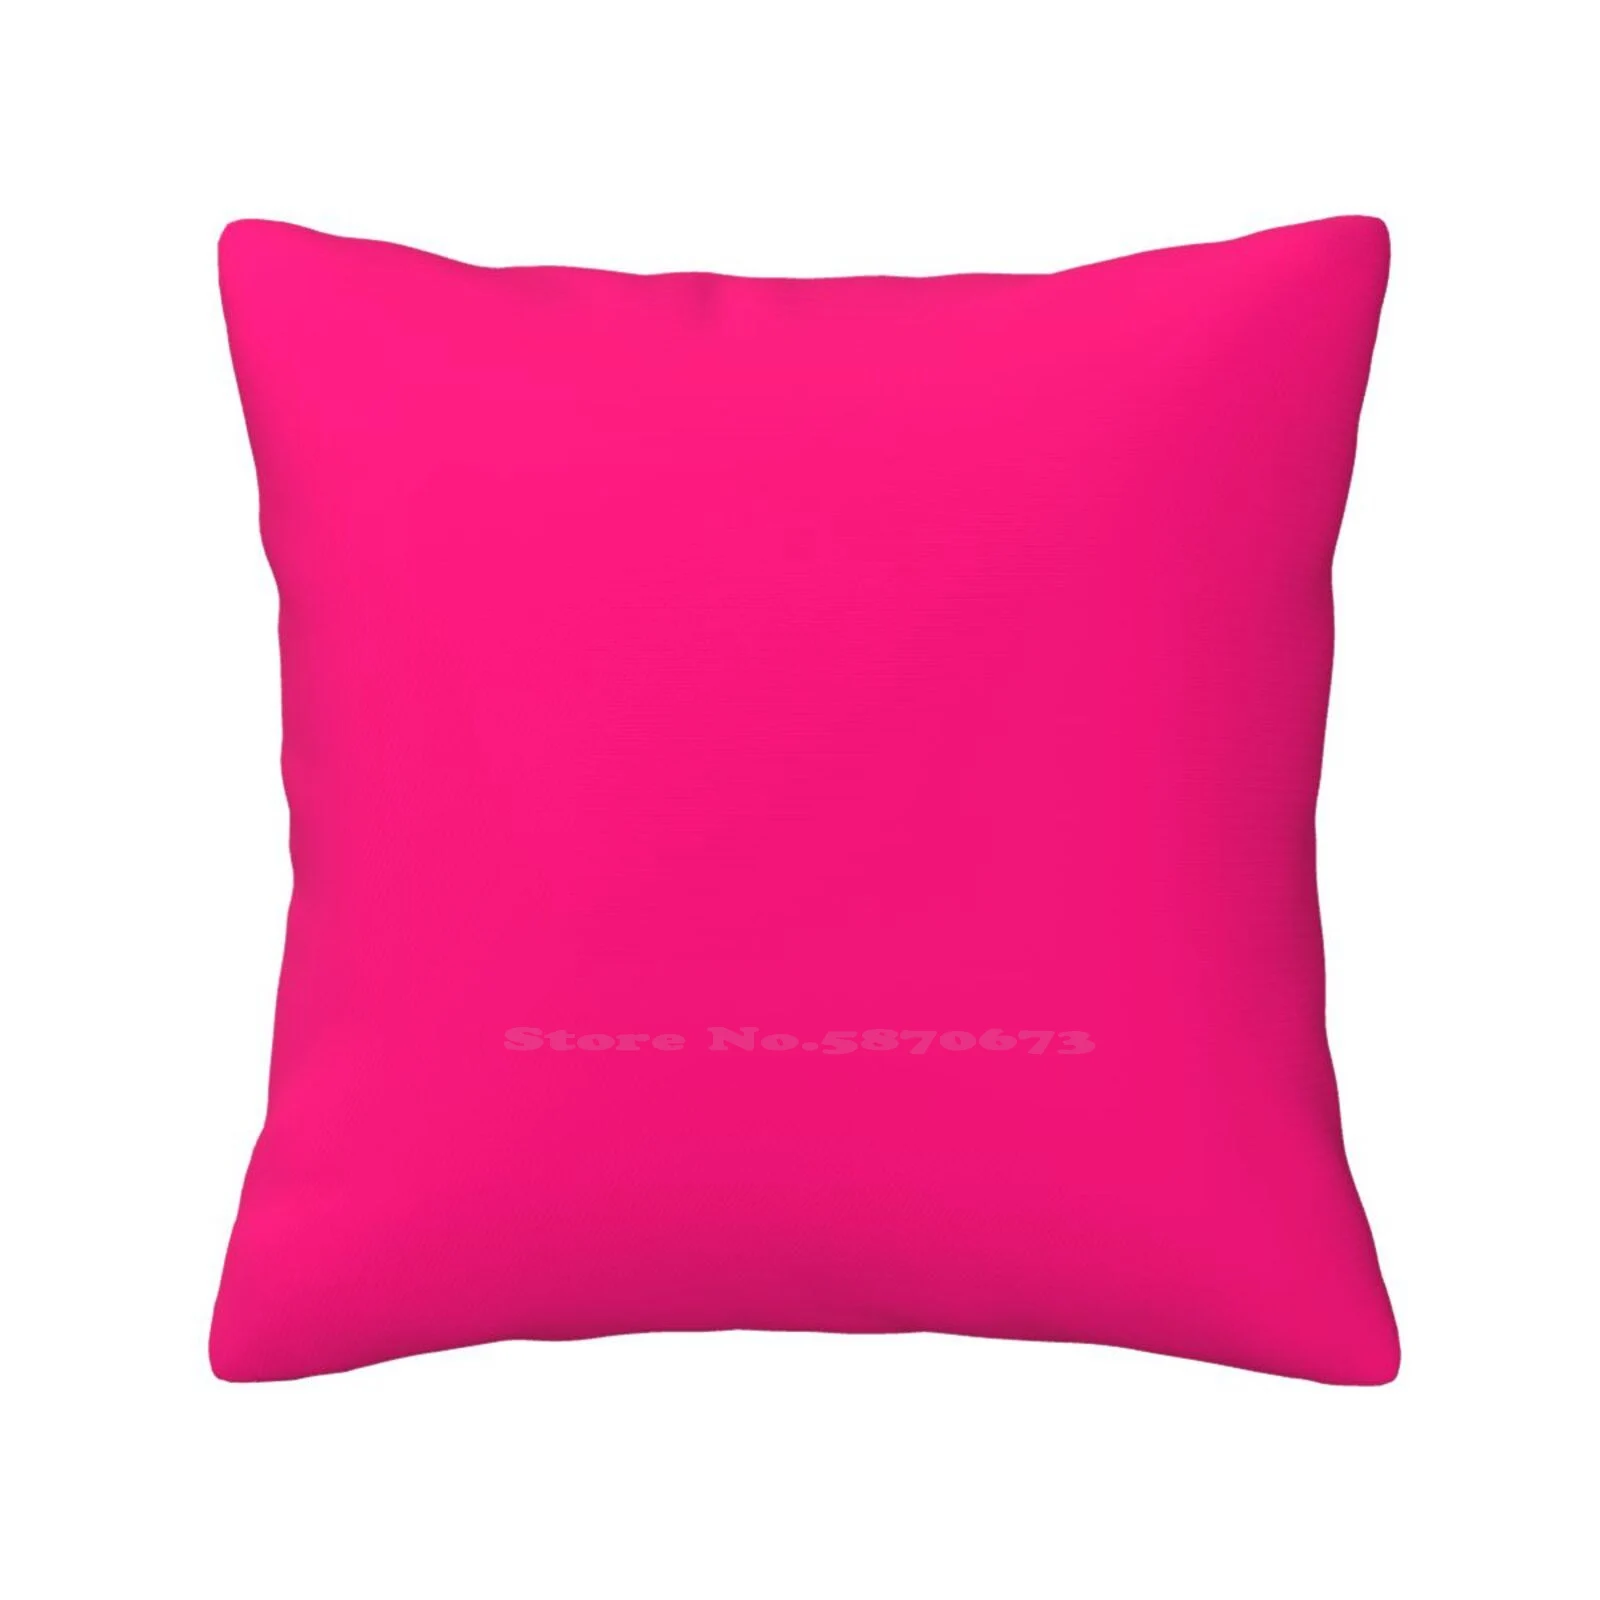 

Hot Pink-Lowest Price On Site Pillow Cover Hug Pillowcase One Colour Simple Plain Solid Minimalist For Her Chic Beautiful Bold